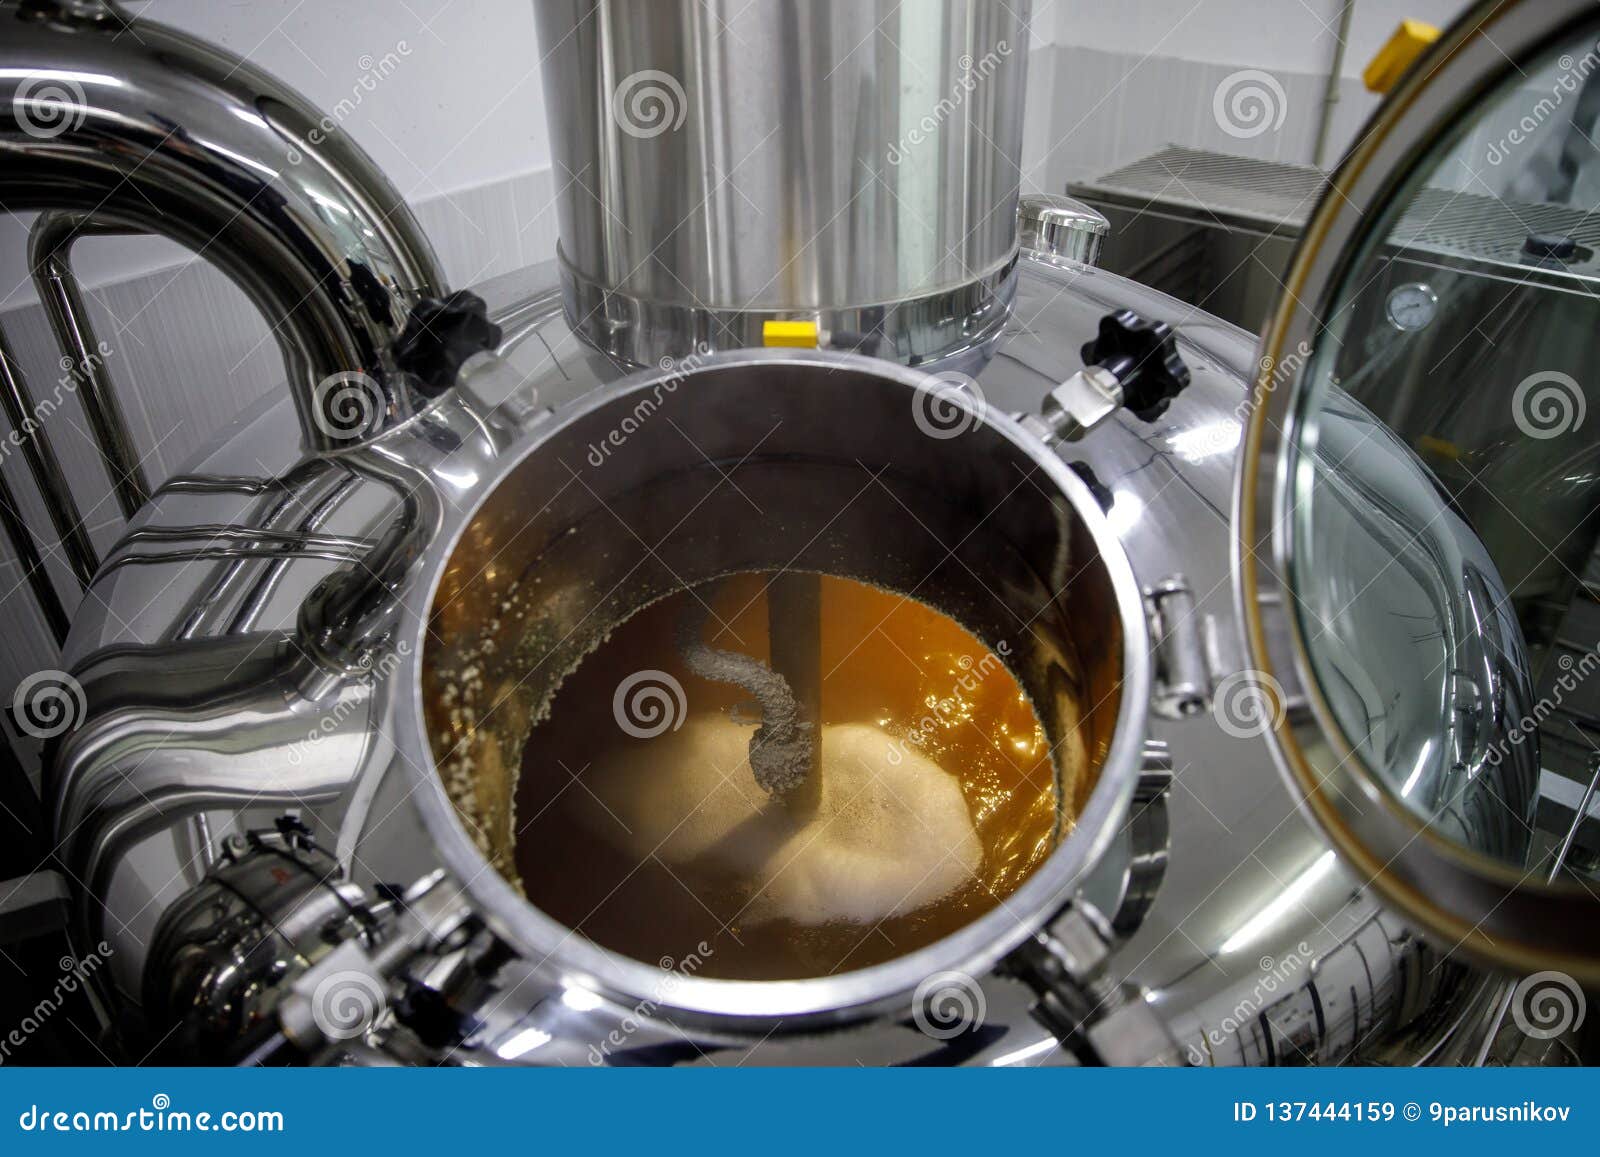 brewing of beer, equipment at microbrewery, top view